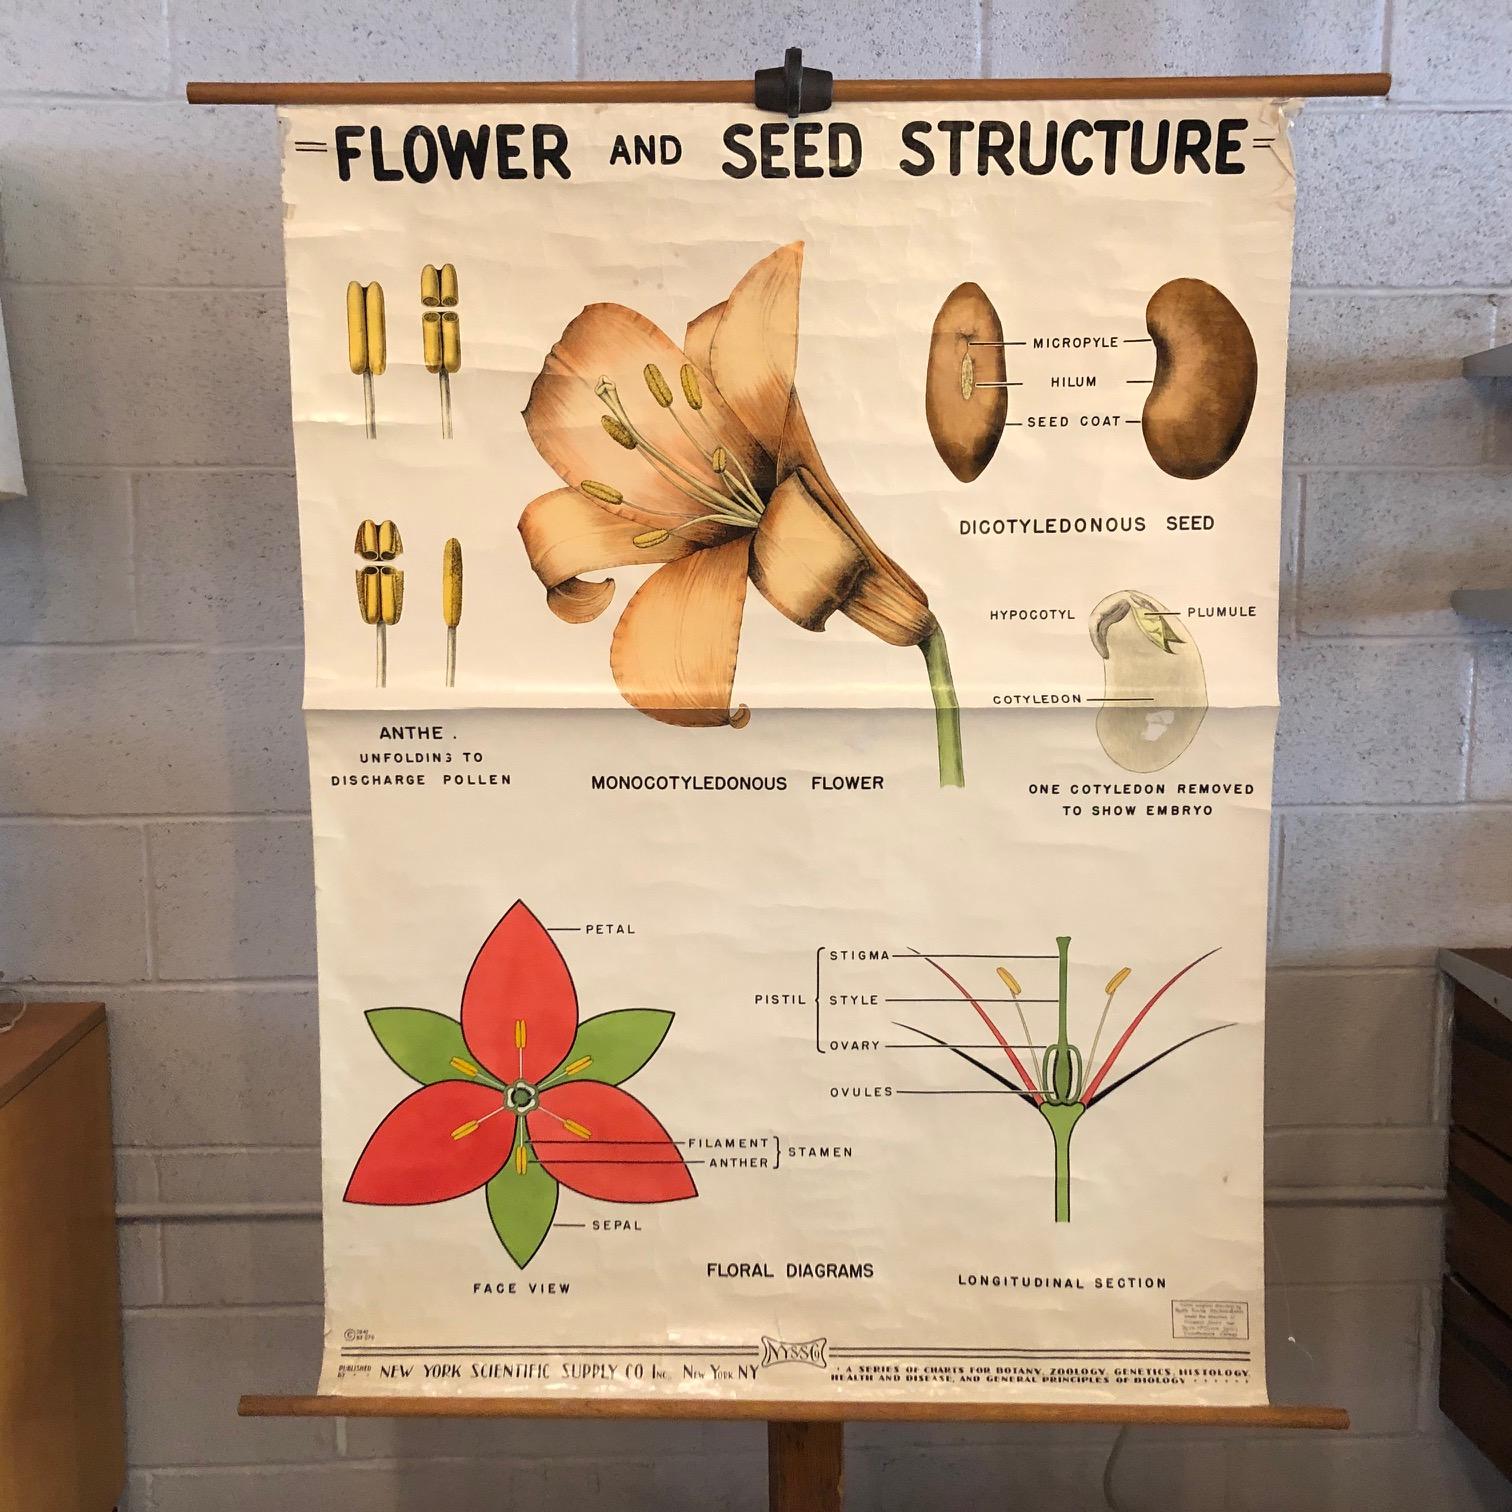 Educational, botanical, biology, roll up chart by New York Scientific Supply Co. circa 1941 depicting Flower and Seed Structure printed on fortified paper with canvas backing on maple rod with ring for hanging.
 